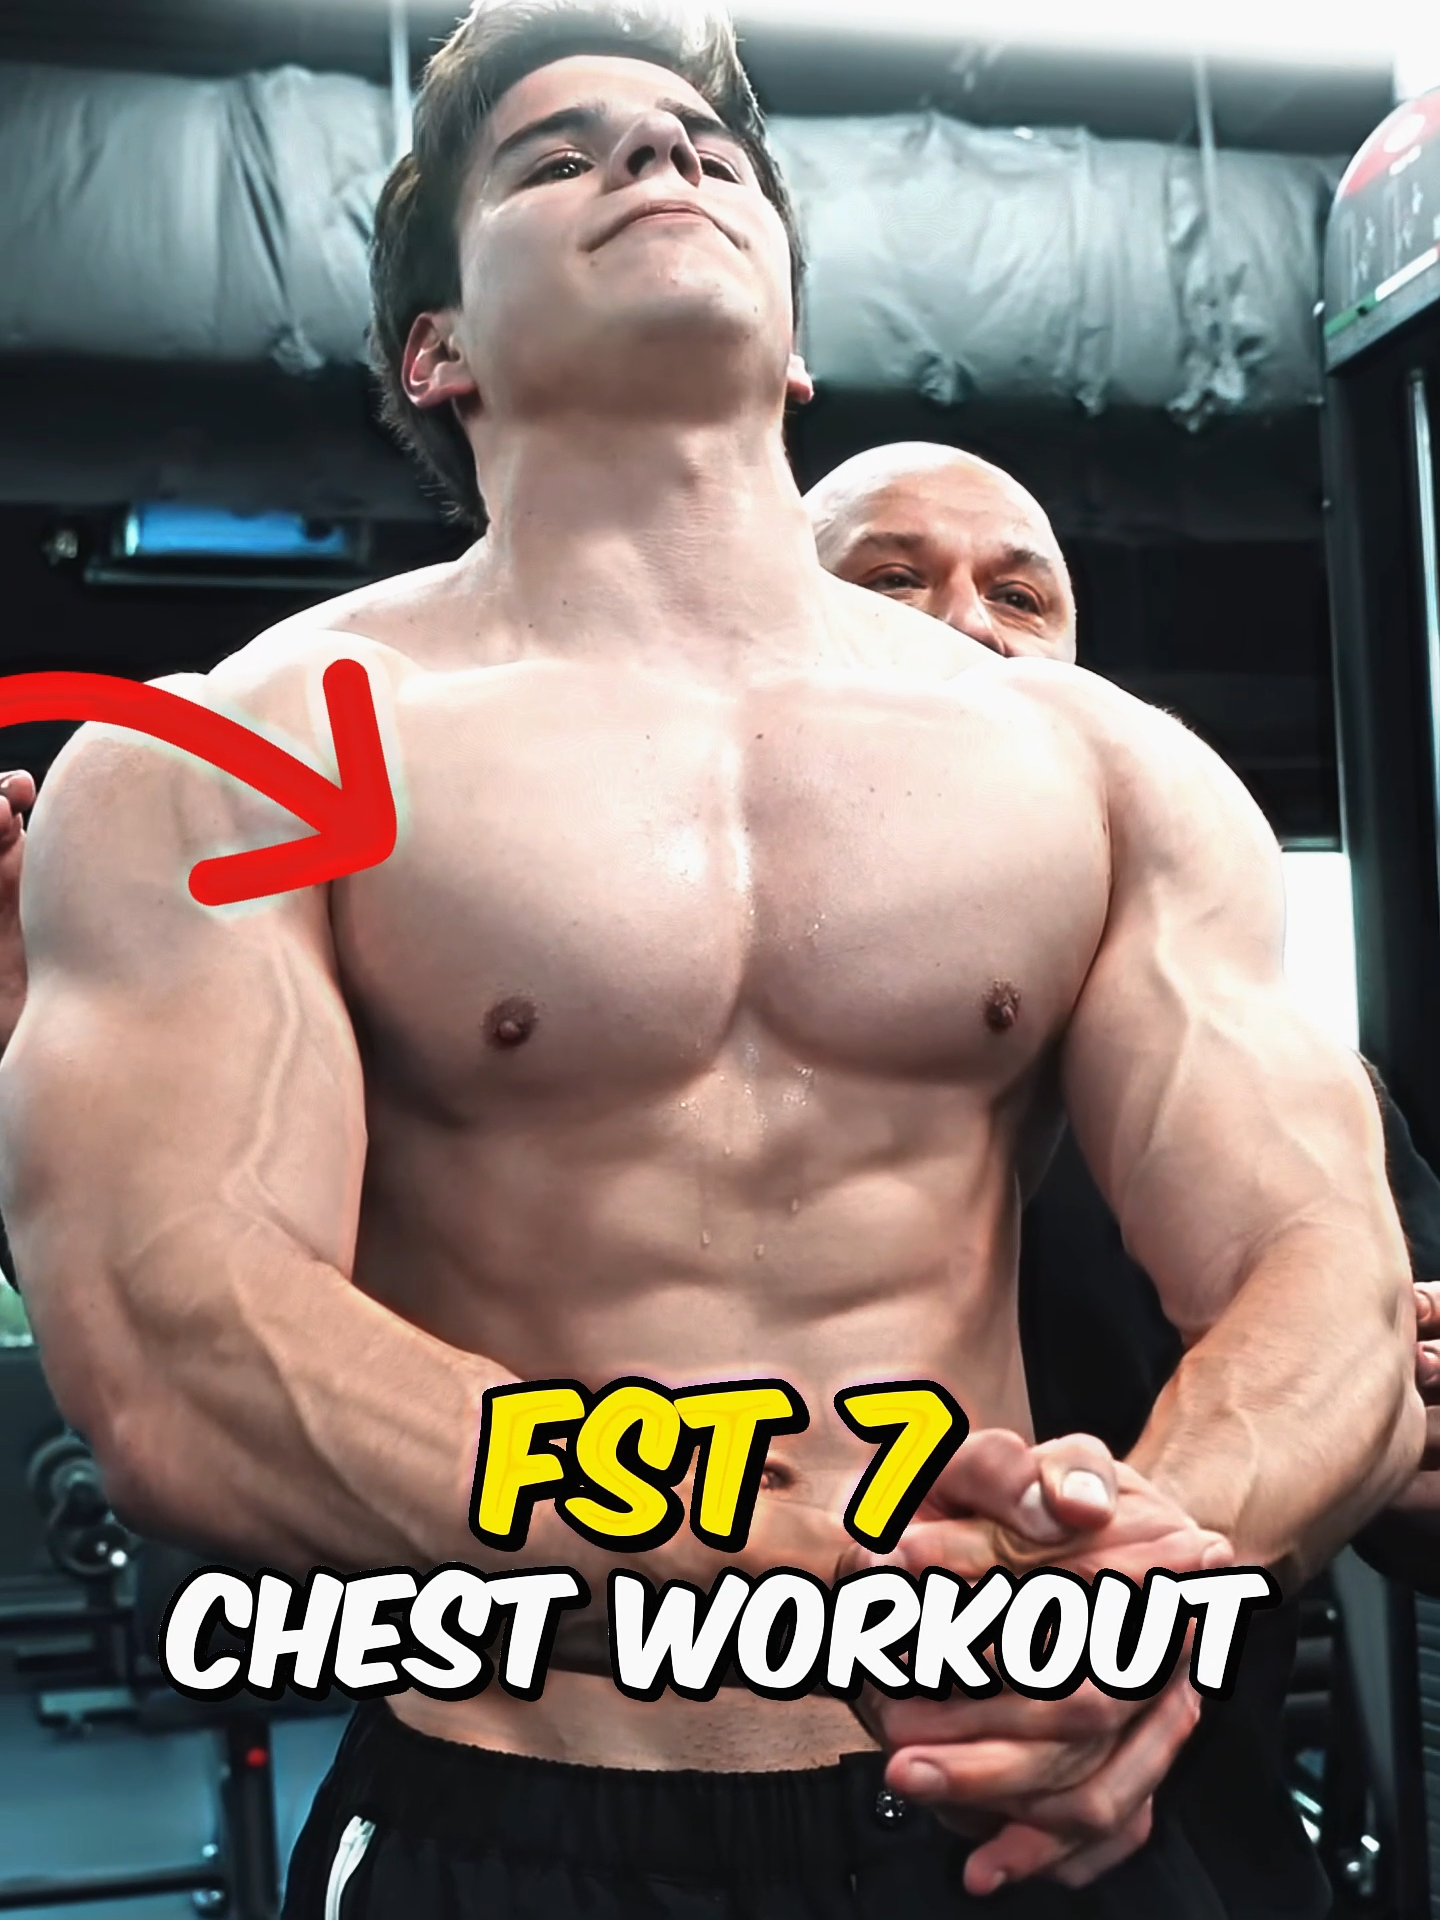 👑 FST-7 Chest Workout by Chris Bumstead Coach Hany Rambod ft. @axelmguerra | Top Olympia Winning Coach 🏆 #fst7  #fst7training  #cbum  #hanyrambod   #chestday  #chestworkout  #foryou  #axelmartinez #GymTok